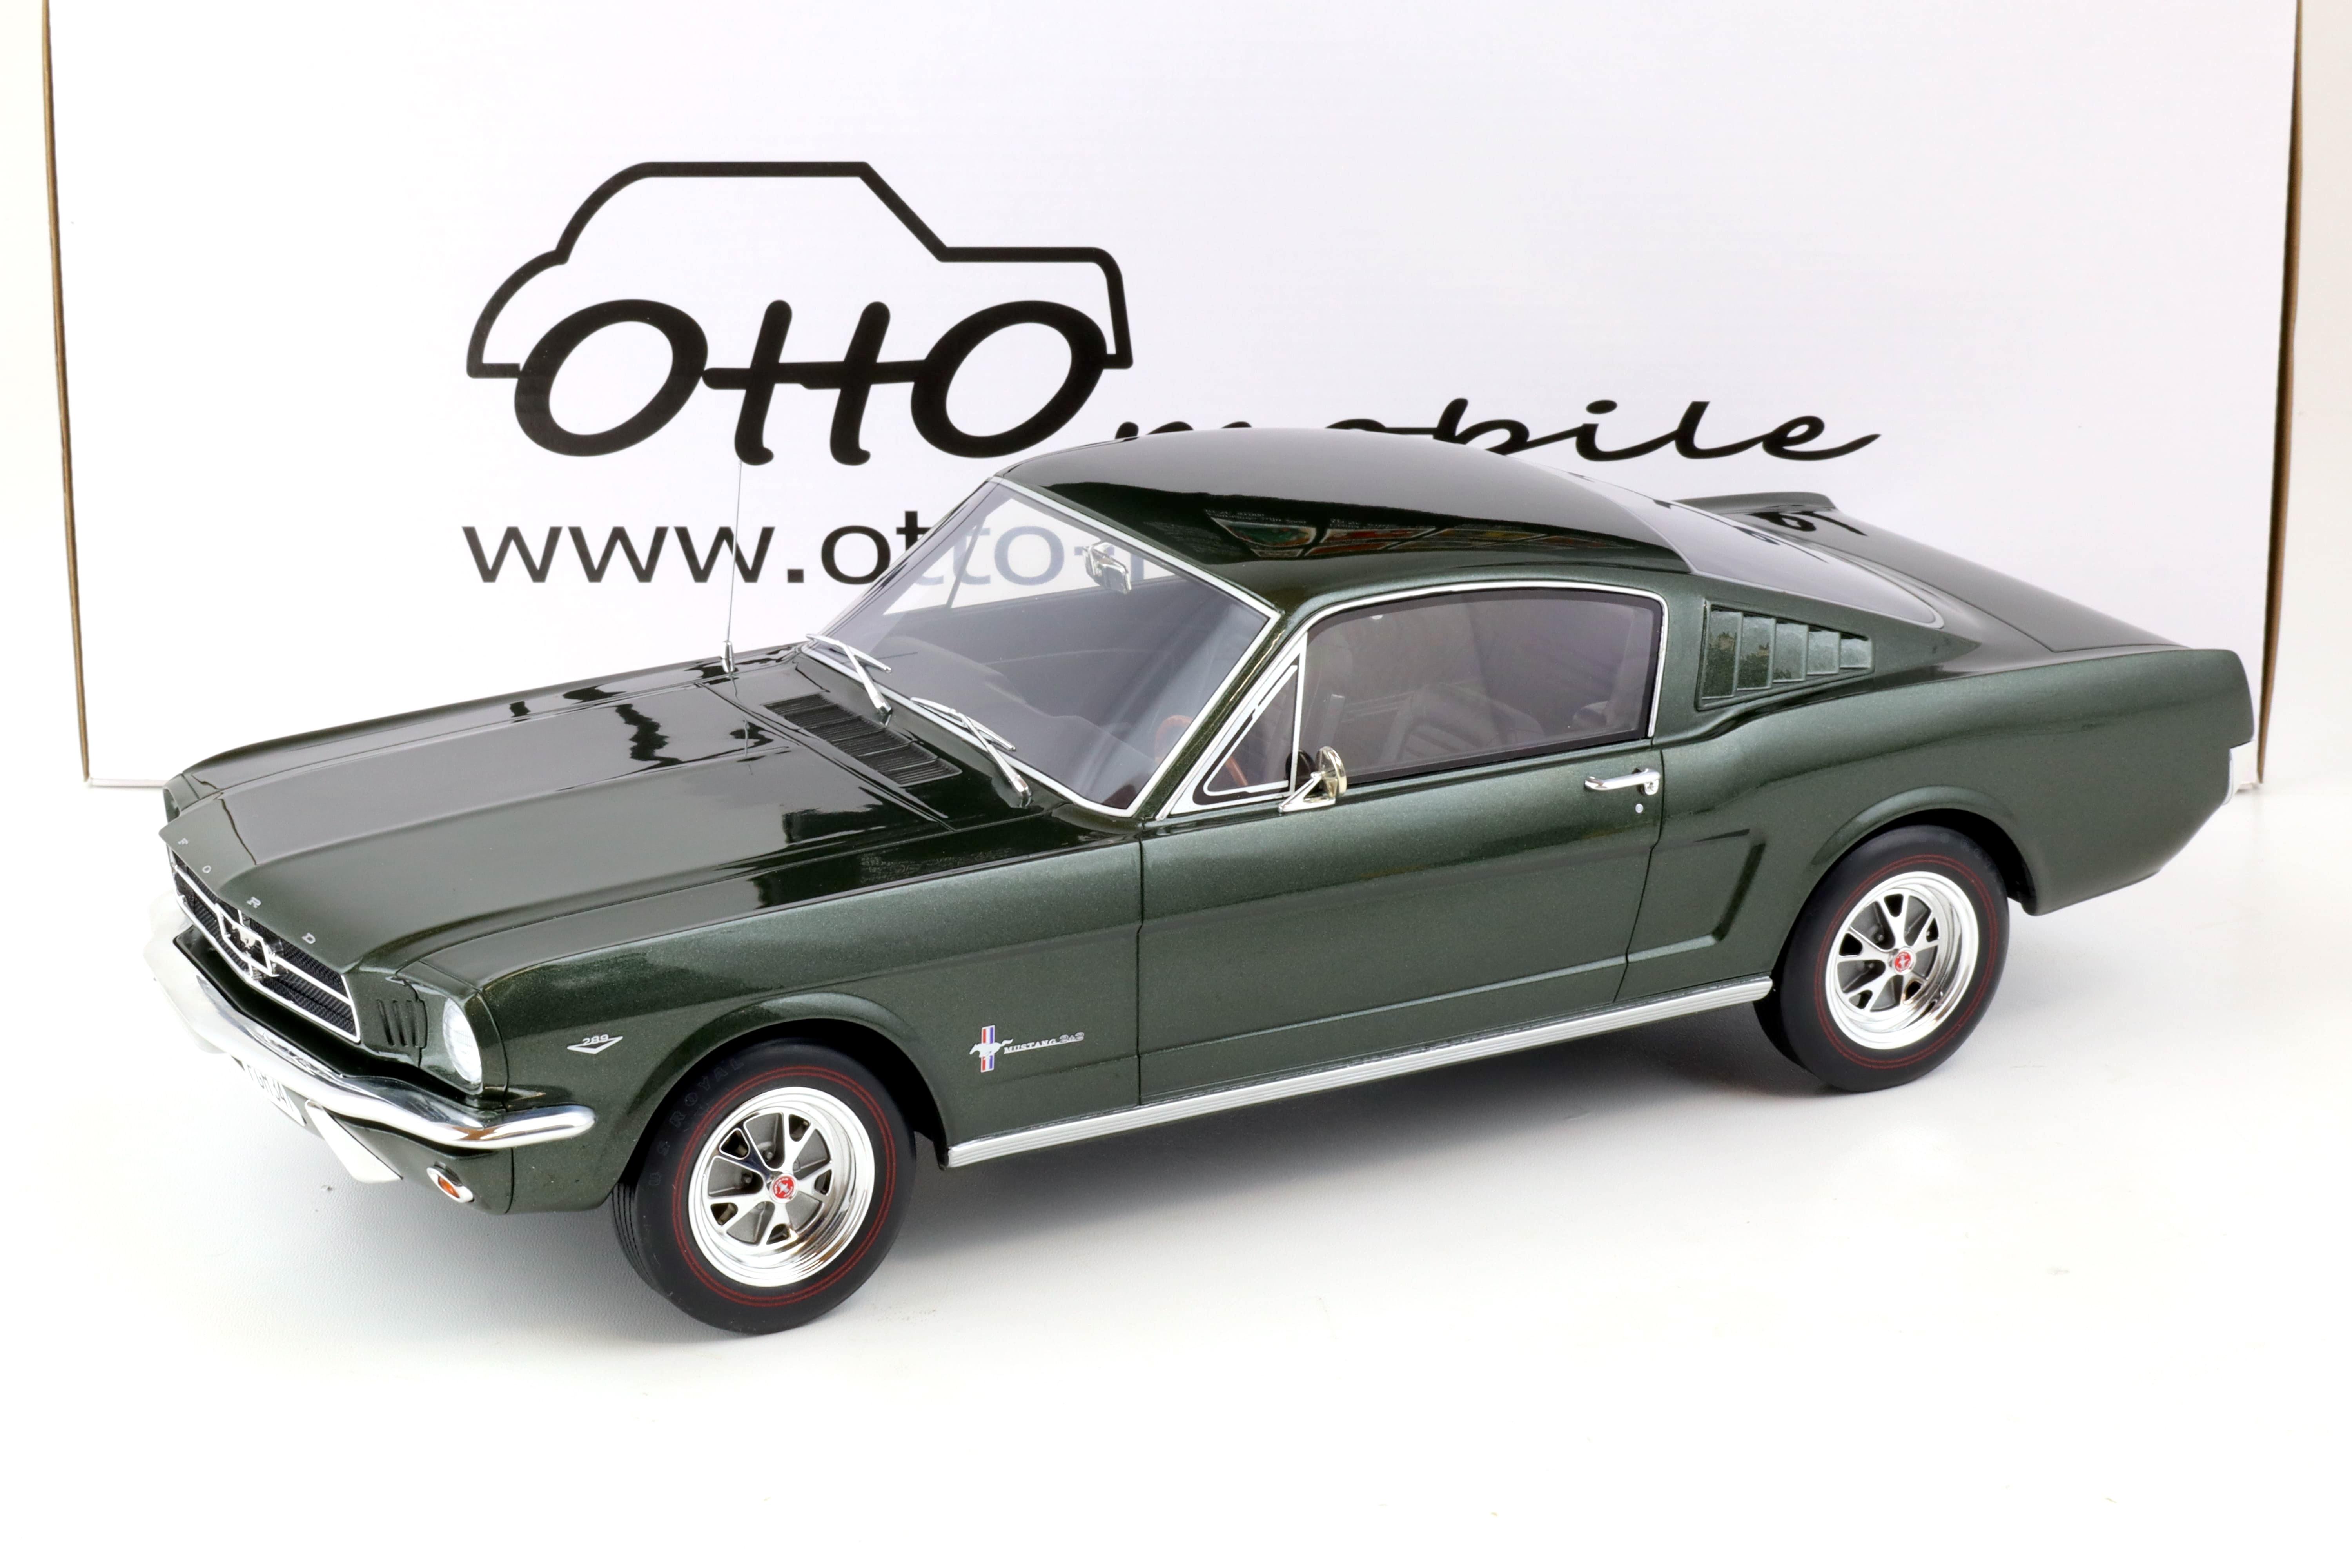 1:12 OTTO mobile G079 Ford Mustang Fastback Coupe 1965 green metallic